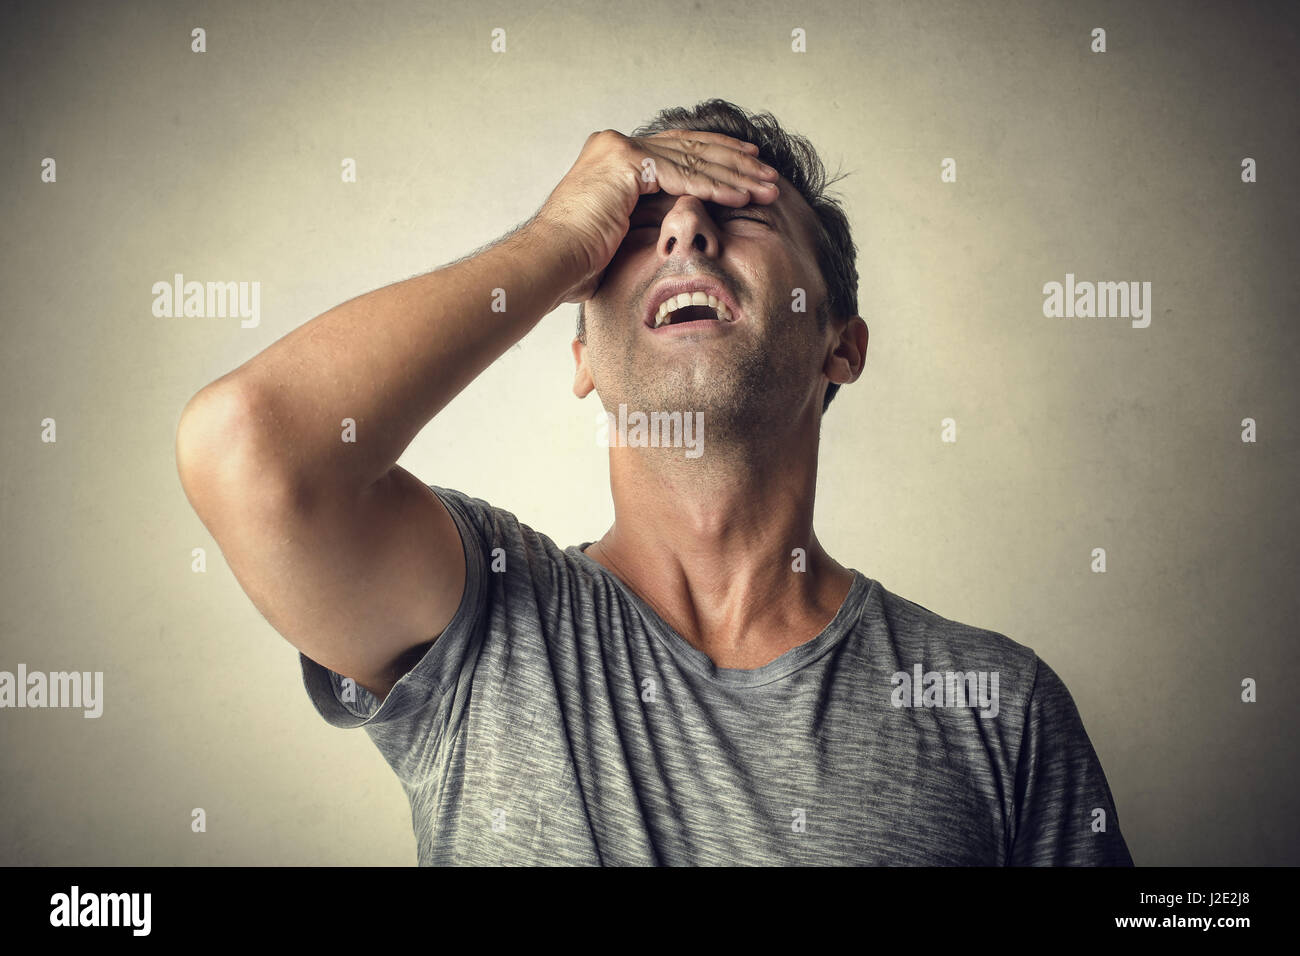 Man being tired and holding his head Stock Photo